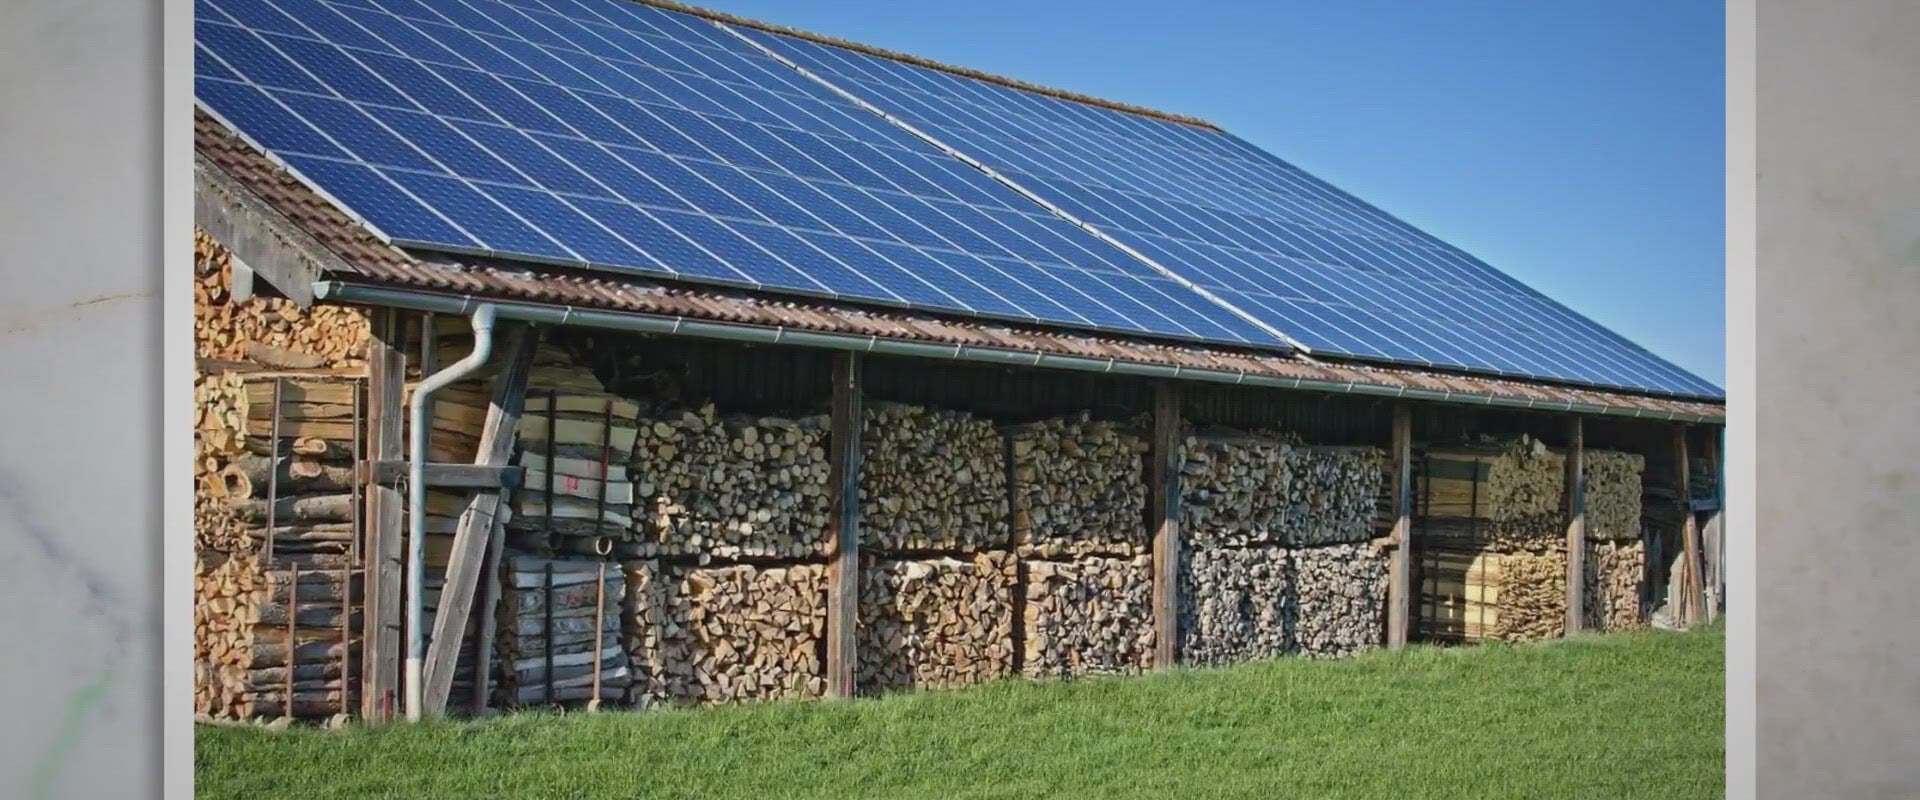 How Much Energy Does a 10 kW Solar System Produce in a Day?